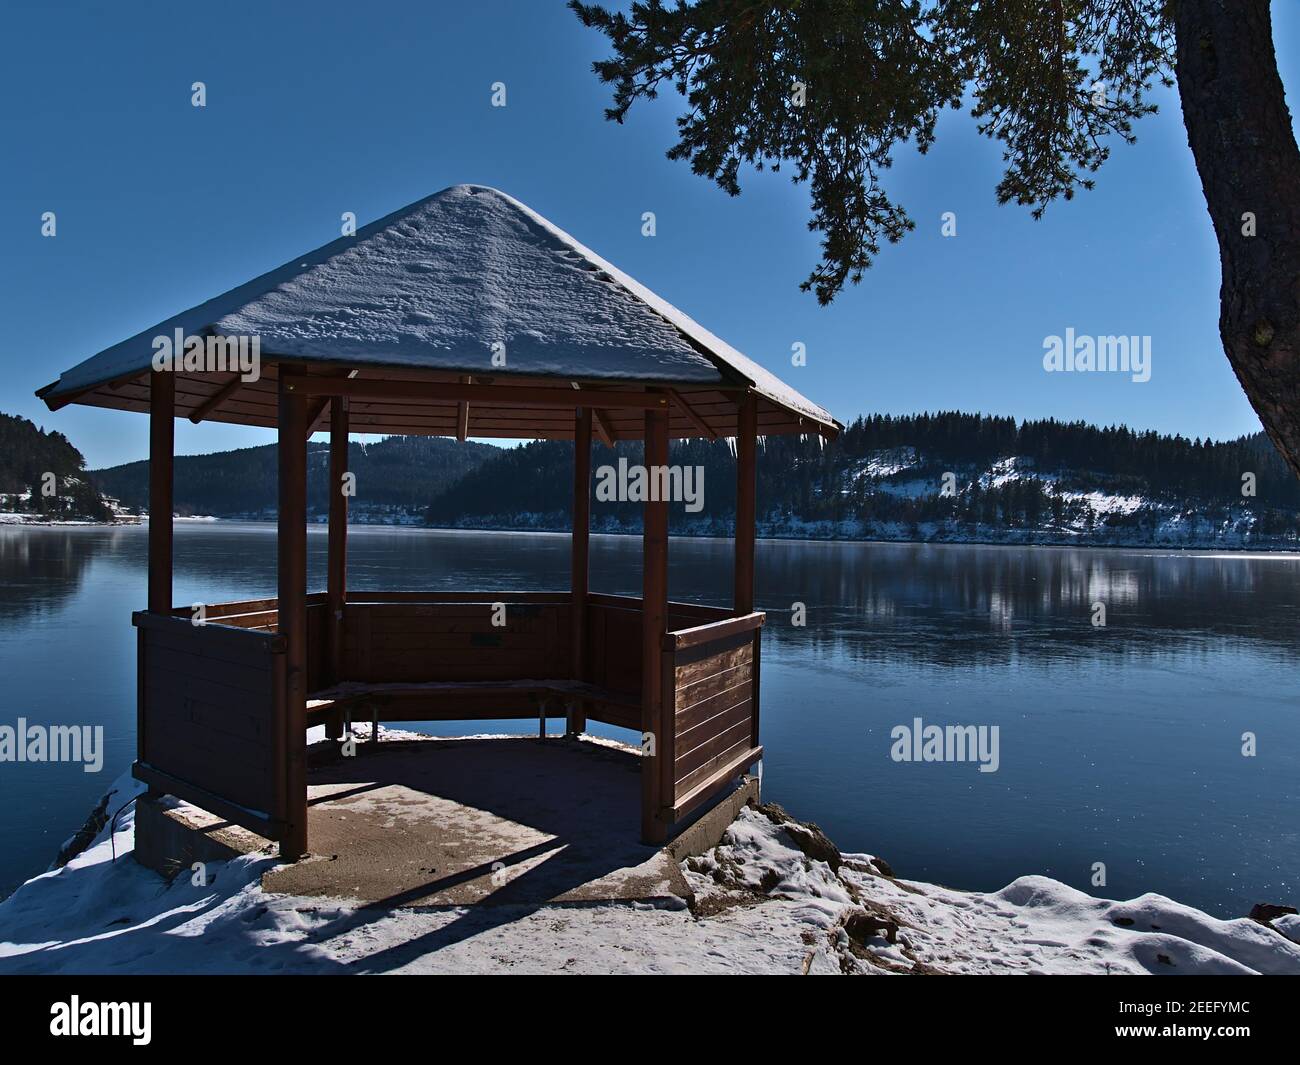 Snow-covered wooden pavillon on the shore of frozen Schluchsee lake, a popular tourist destination in Black Forest mountain range, Germany, in winter. Stock Photo